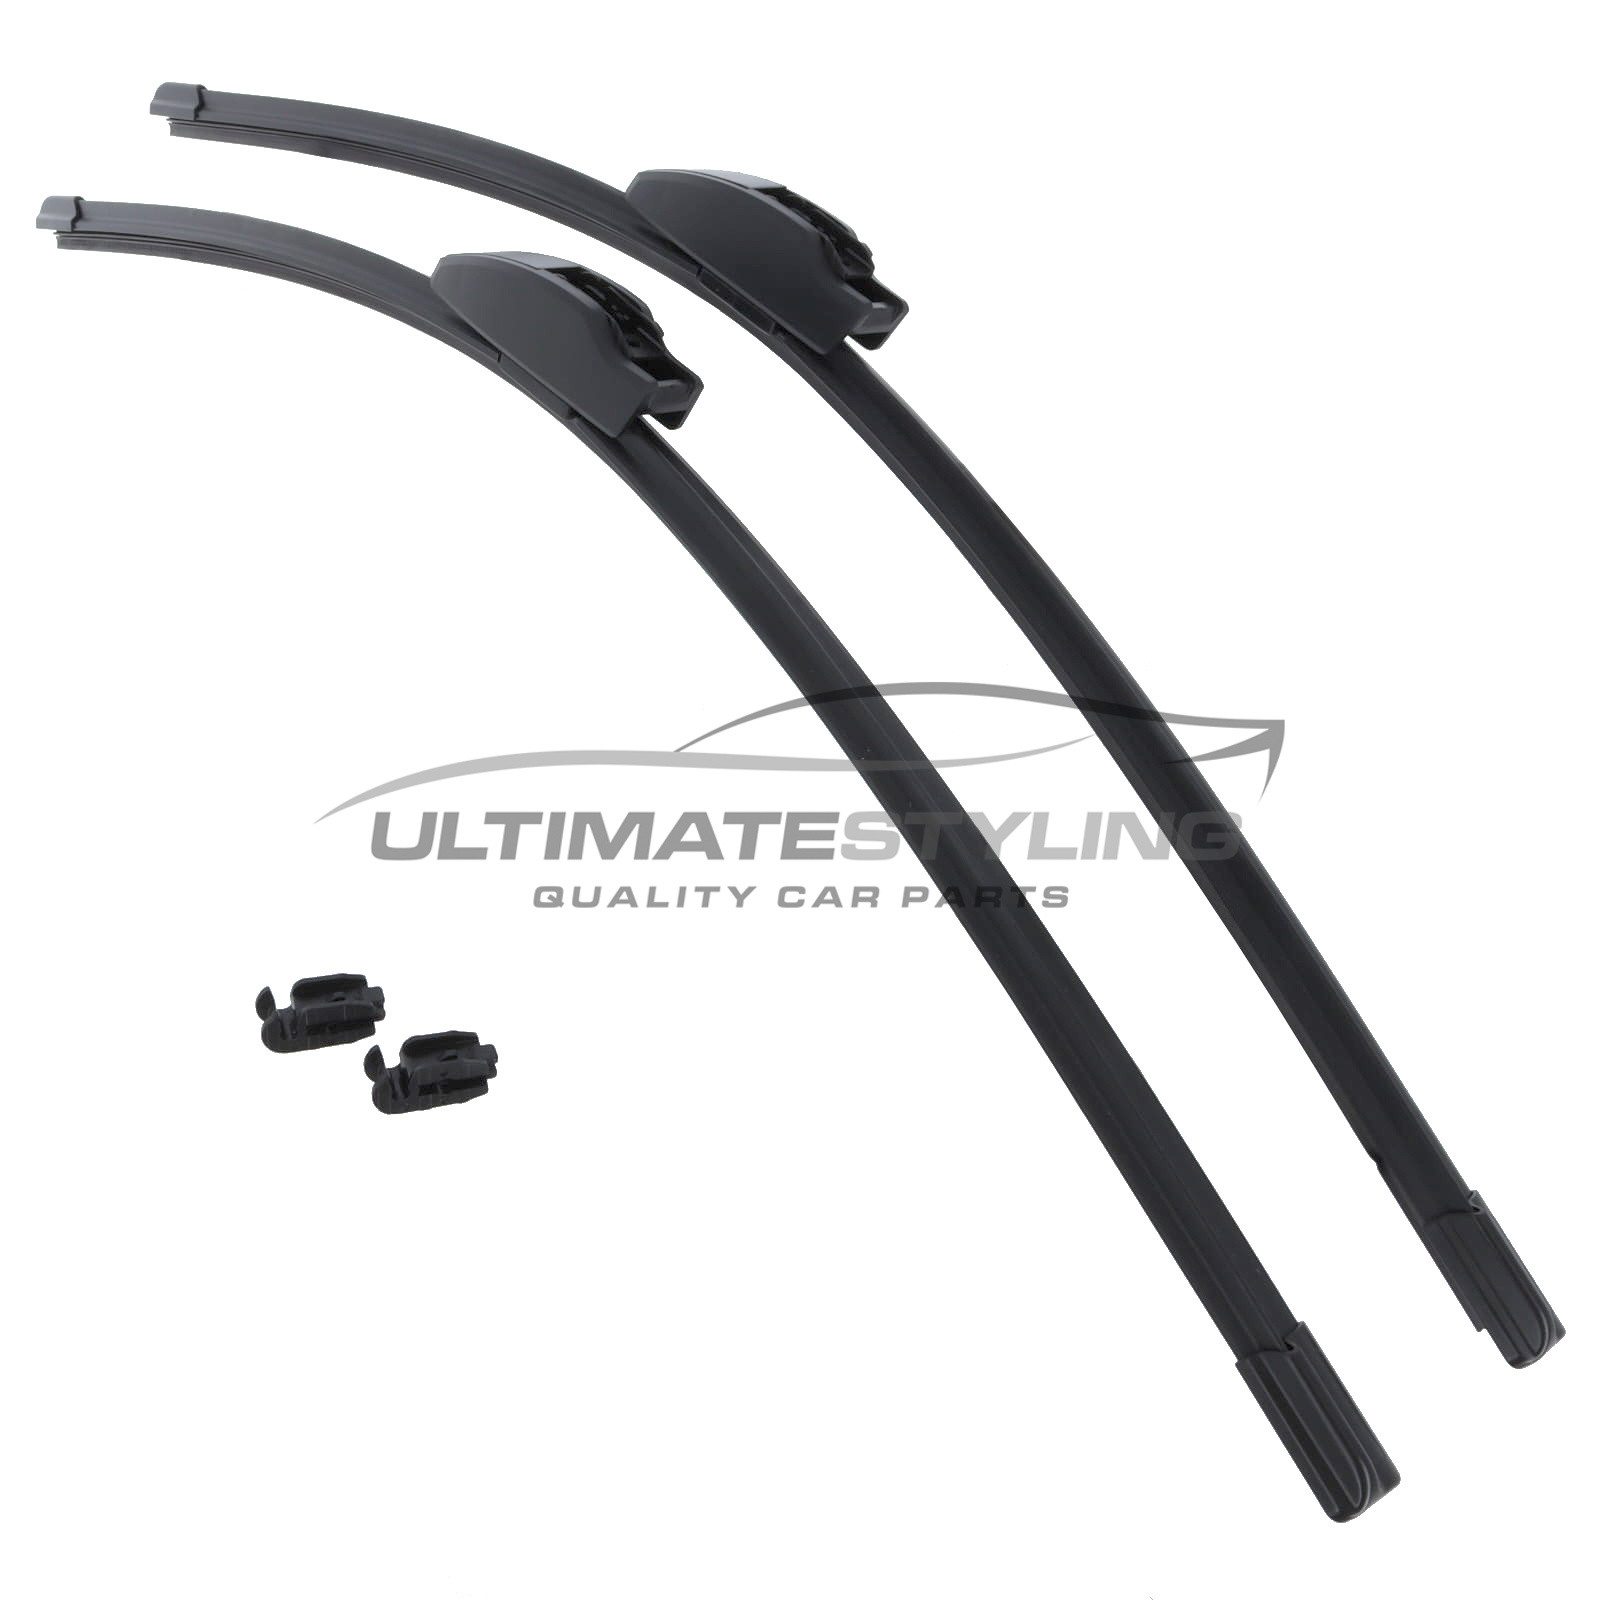 Drivers Side & Passenger Side (Front) Wiper Blades for Vauxhall Zafira